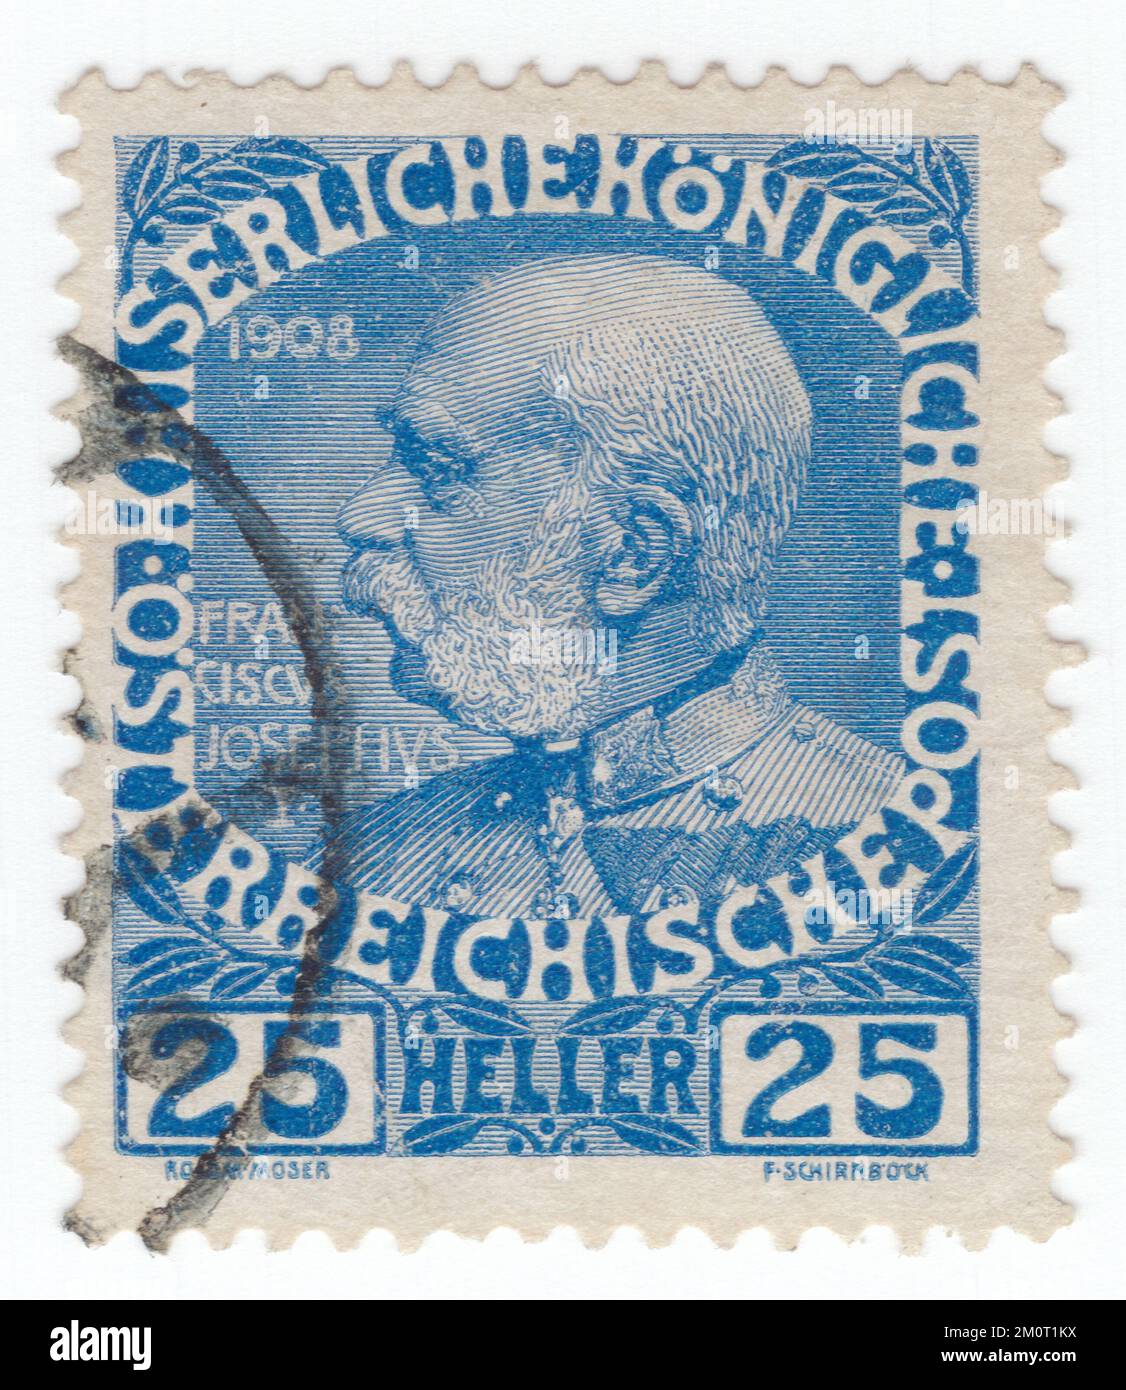 AUSTRIA — 1913: An 25 heller ultramarine postage stamp depicting portrait of Franz Joseph I. Definitive set issued for the 60th year of the reign of Austrian Monarch Franz Josef, Emperor of Austria, King of Hungary, and the other states of the Habsburg monarchy. Franz Joseph I or Francis Joseph I  was Emperor of Austria, King of Hungary, and the other states of the Habsburg monarchy from 2 December 1848 until his death on 21 November 1916.[1] In the early part of his reign, his realms and territories were referred to as the Austrian Empire, but were reconstituted as the dual monarchy Stock Photo